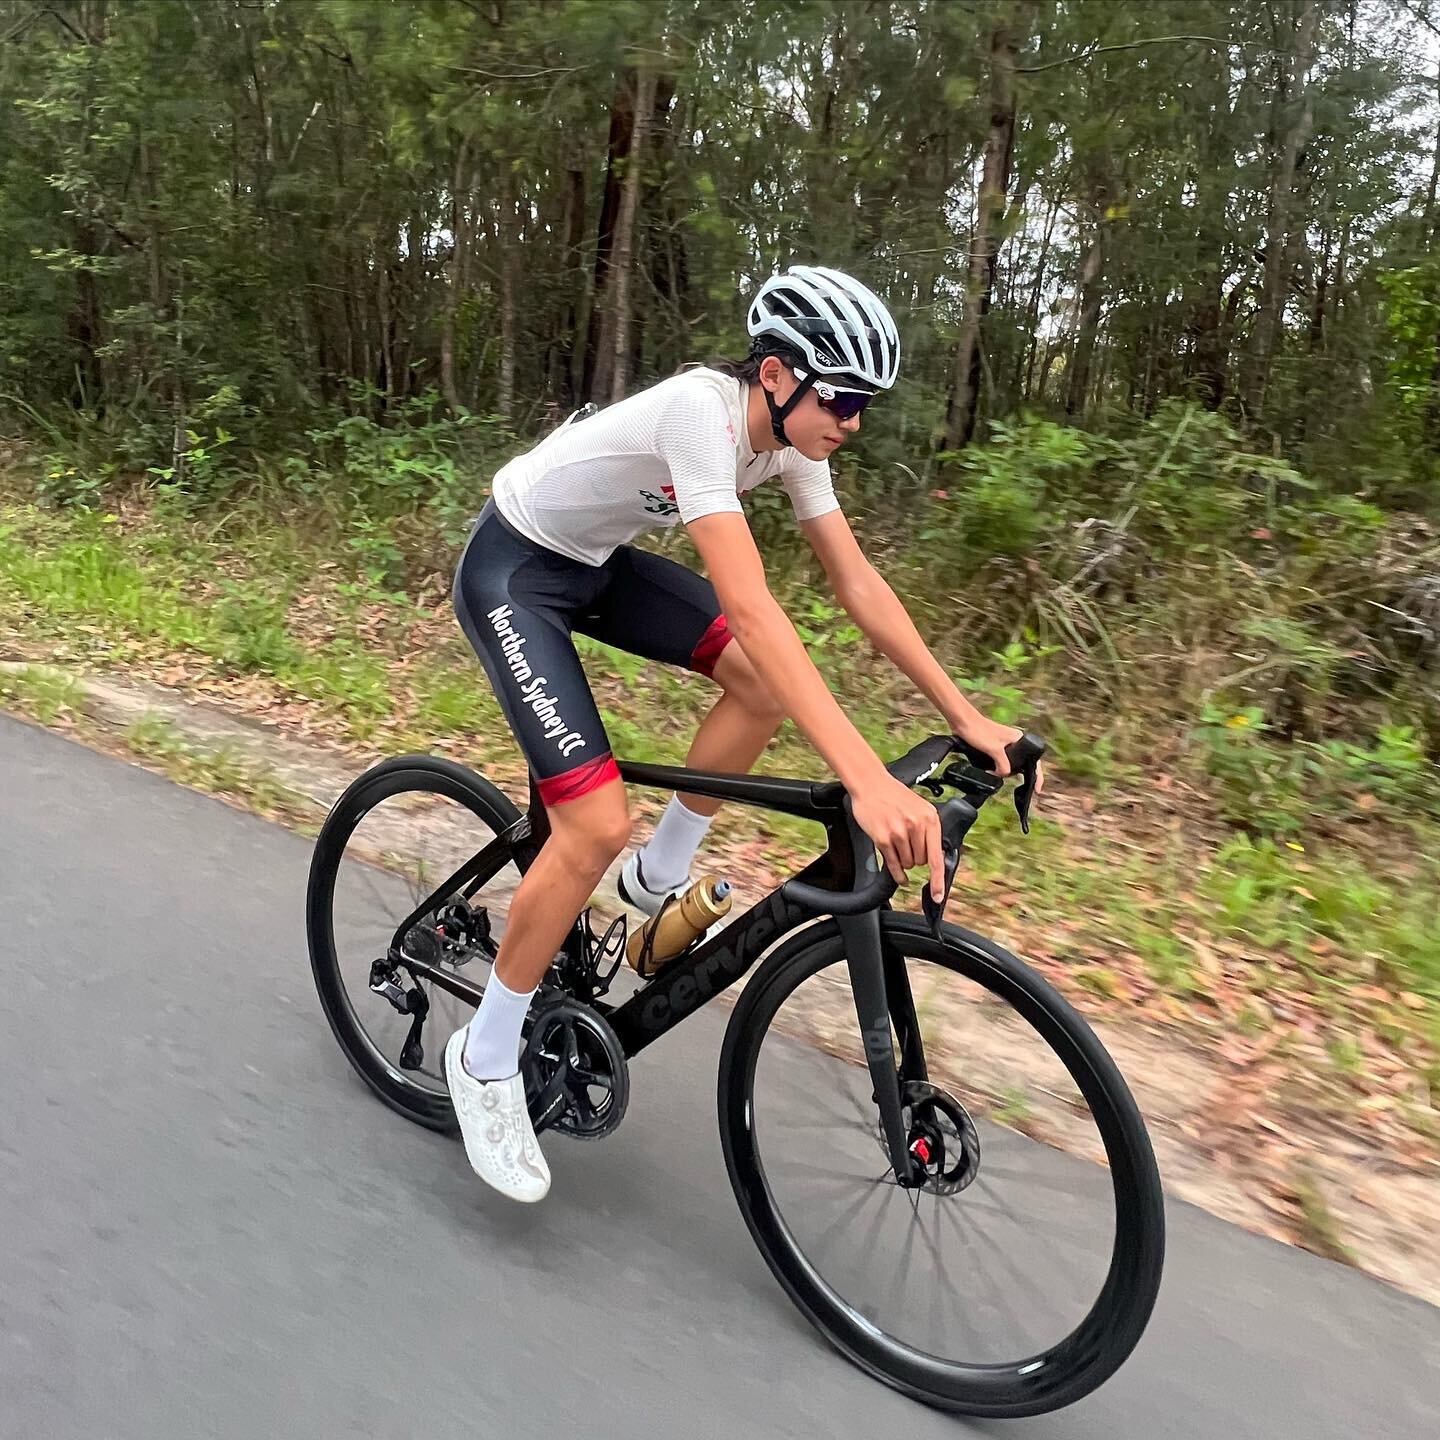 Introducing one of the latest athletes to join the HSC family, recent winner of the Anthony Spurgeon Snr. Memorial @lucas_stevens0n.
If the old saying &ldquo;if you can win at Heffron, you can win anywhere&rdquo; has anything to go by, there&rsquo;s 